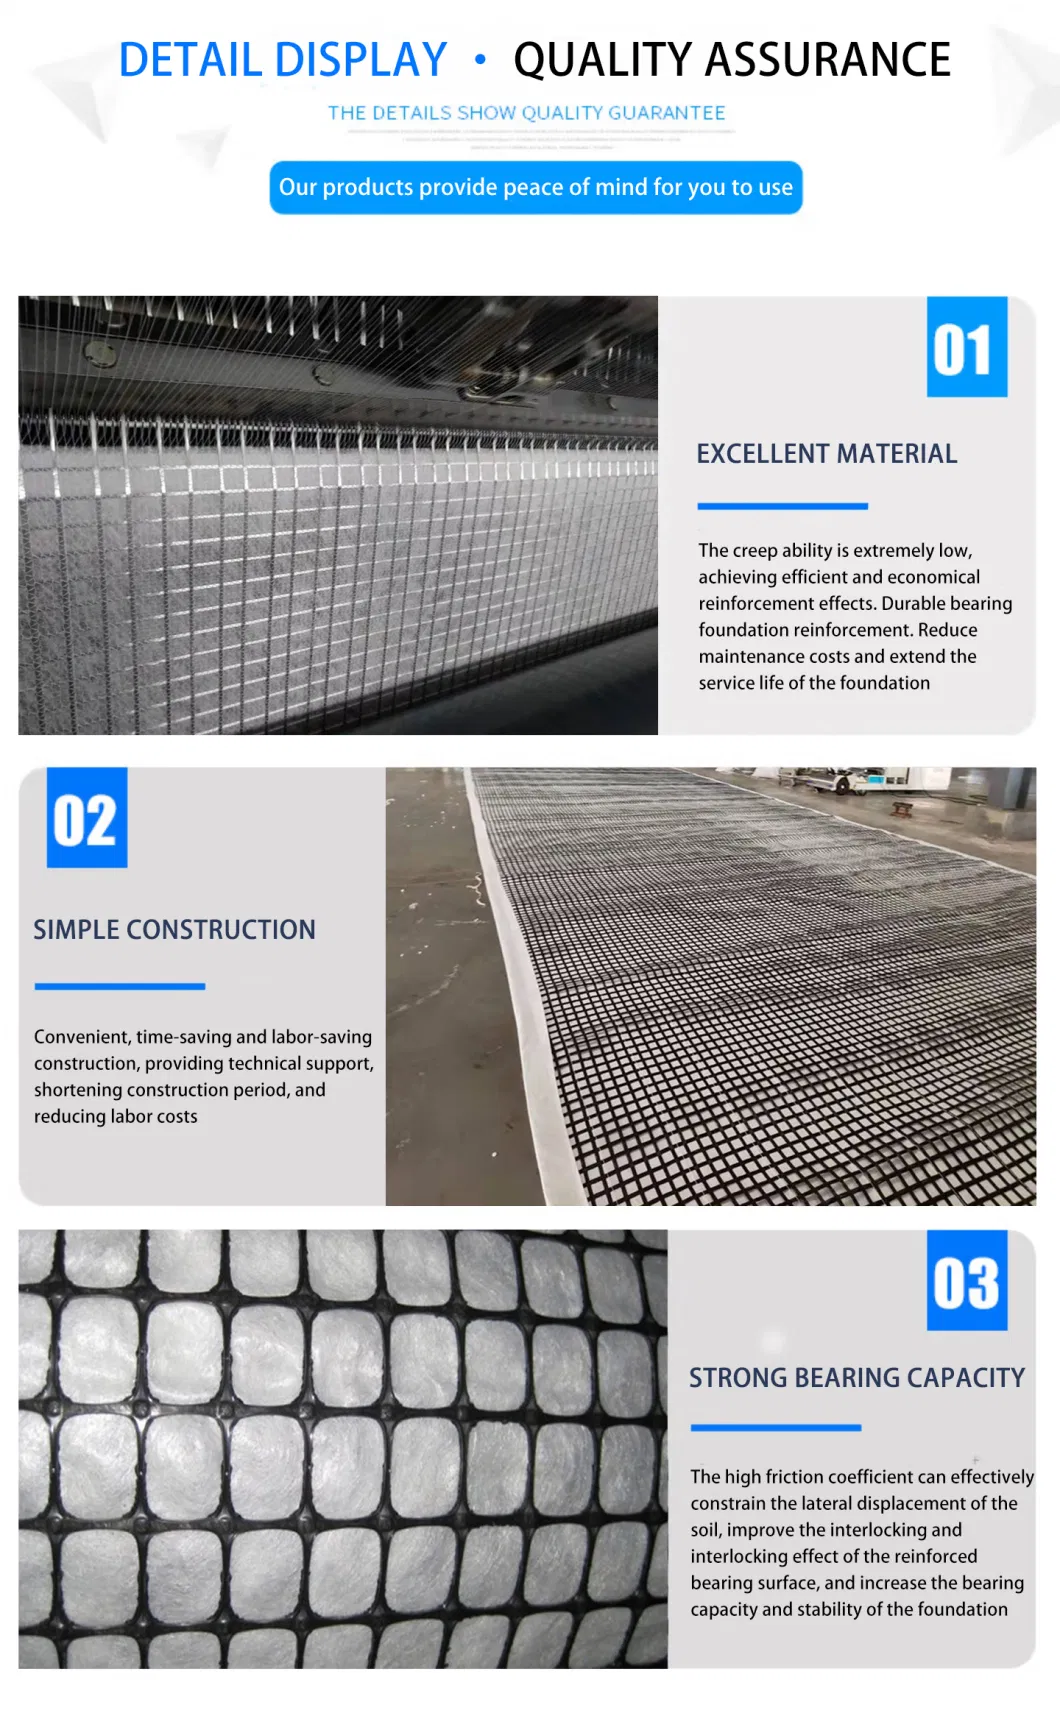 50/50kn Combigrid Biaxial Geogrid Composite with 150g Non Woven Geotextile Hot Sell